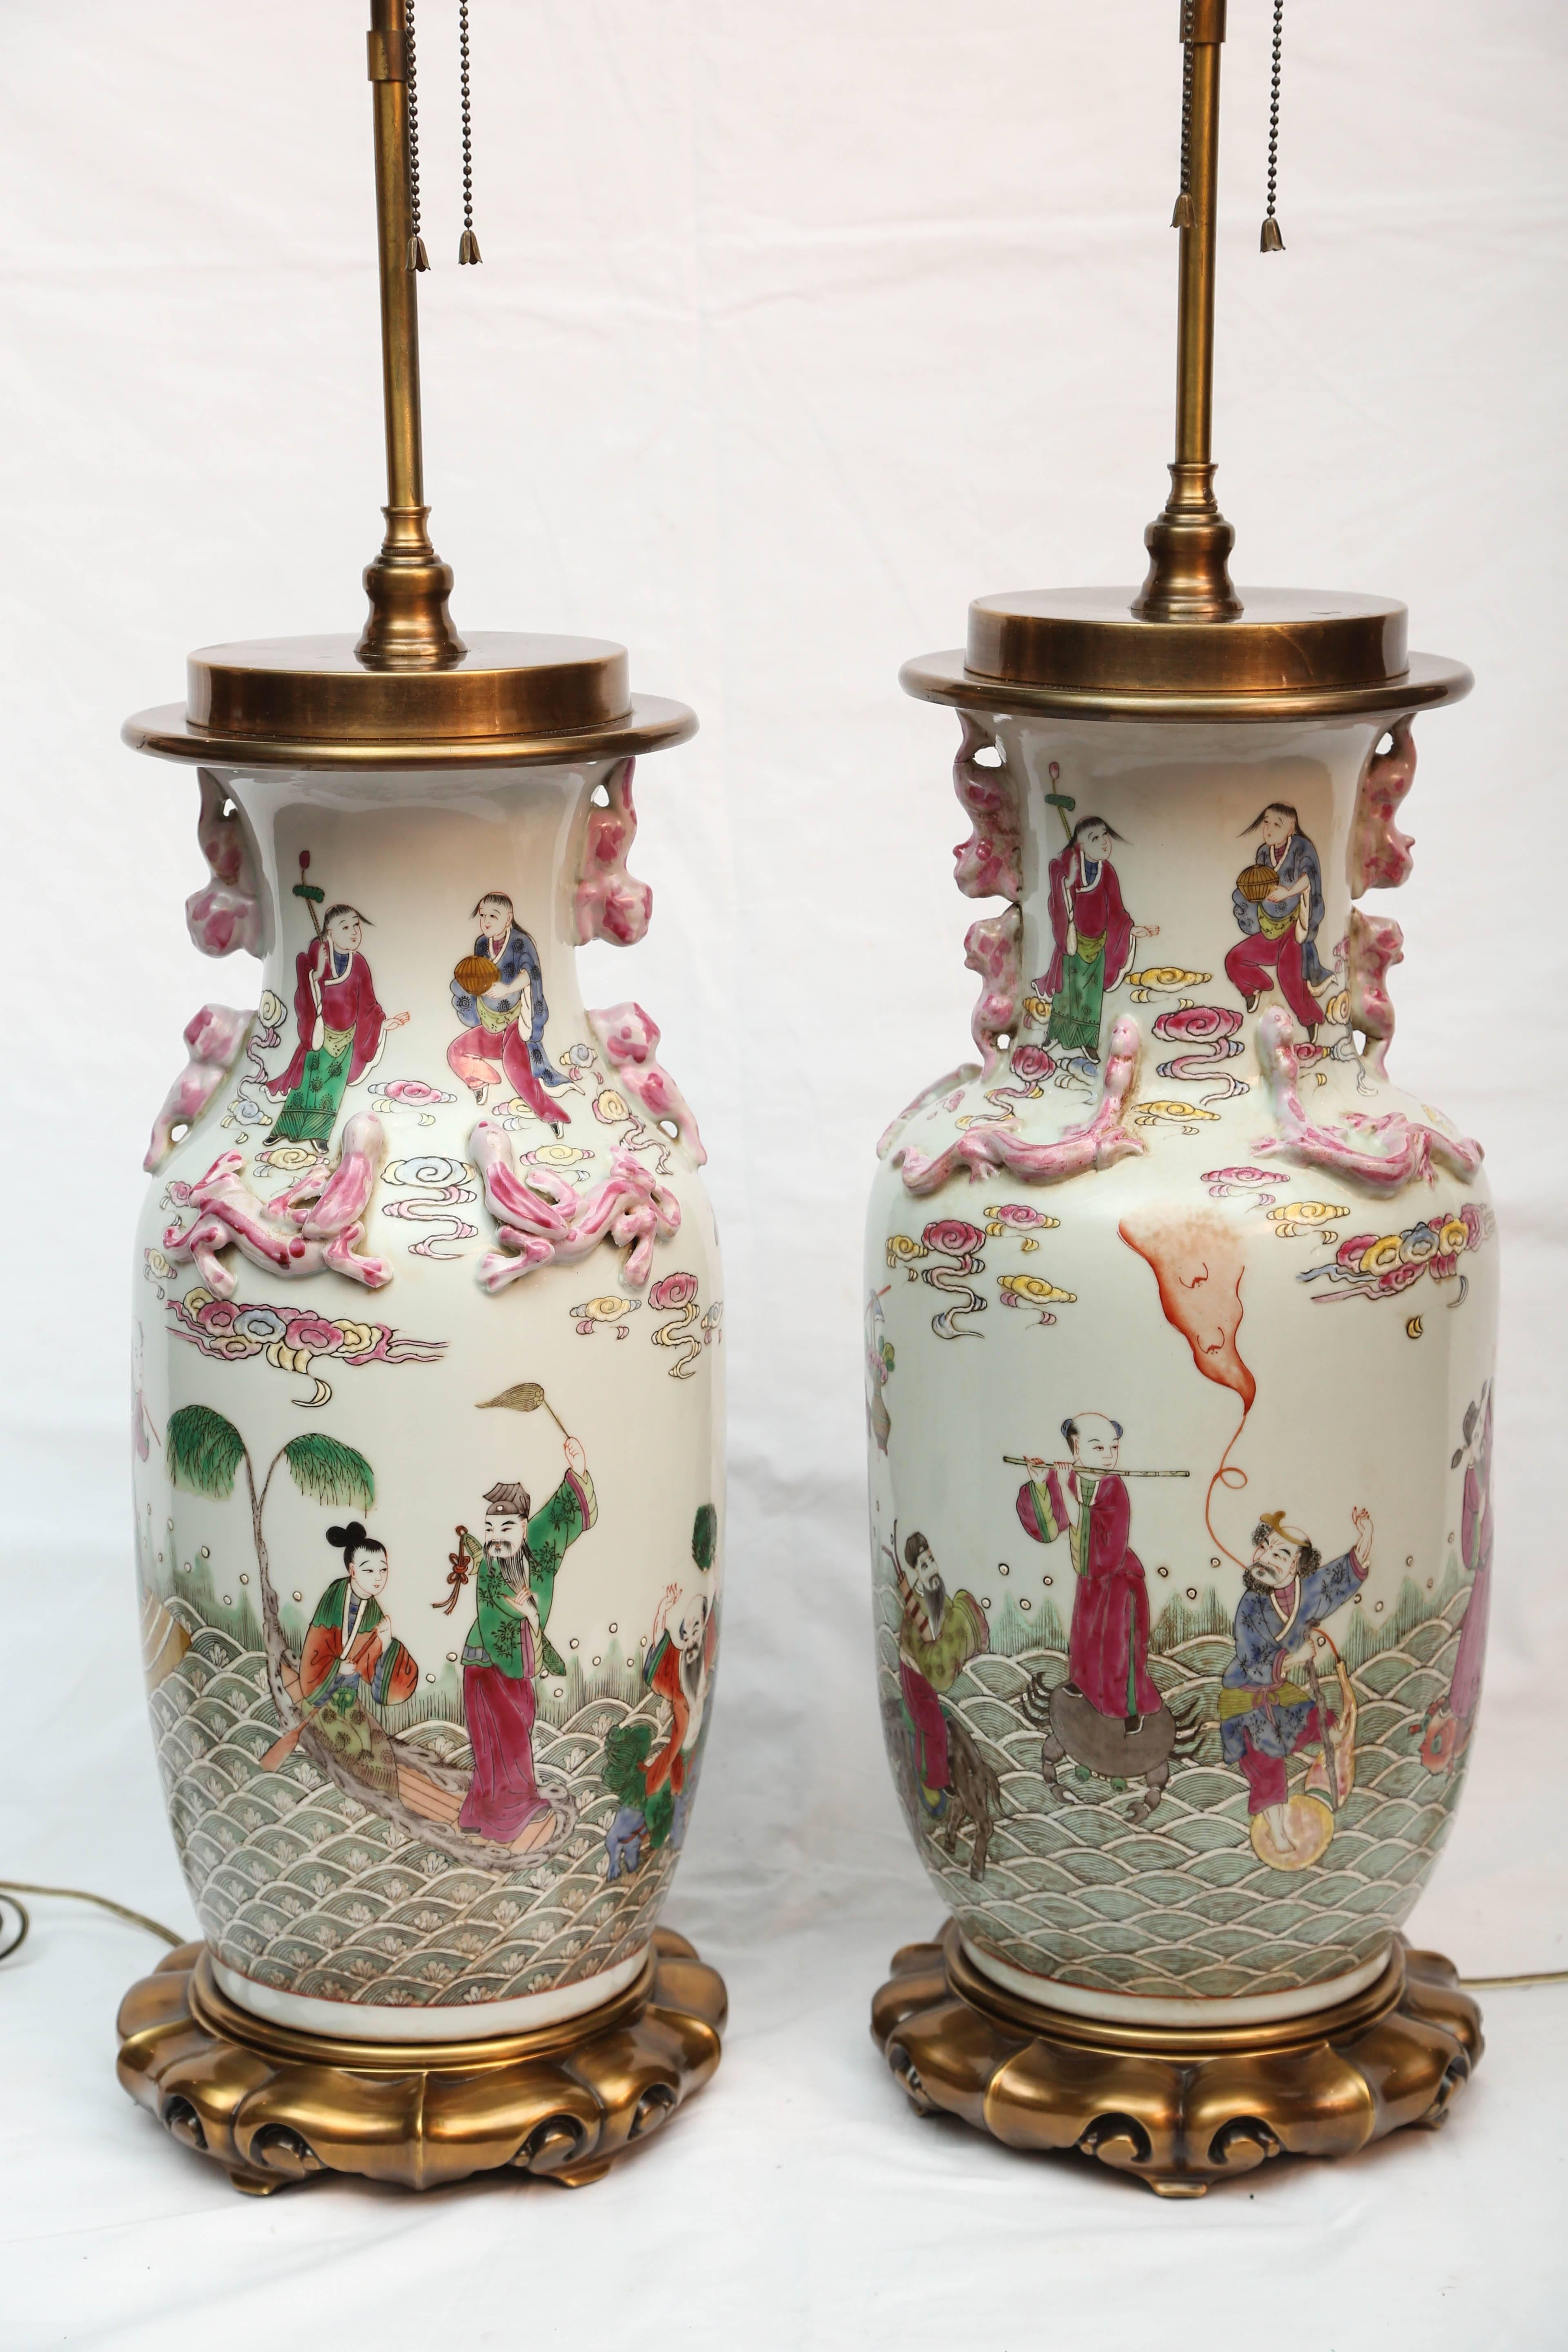 Hand-painted with detailed figures and beautifully scaled. The mounted vases are 24